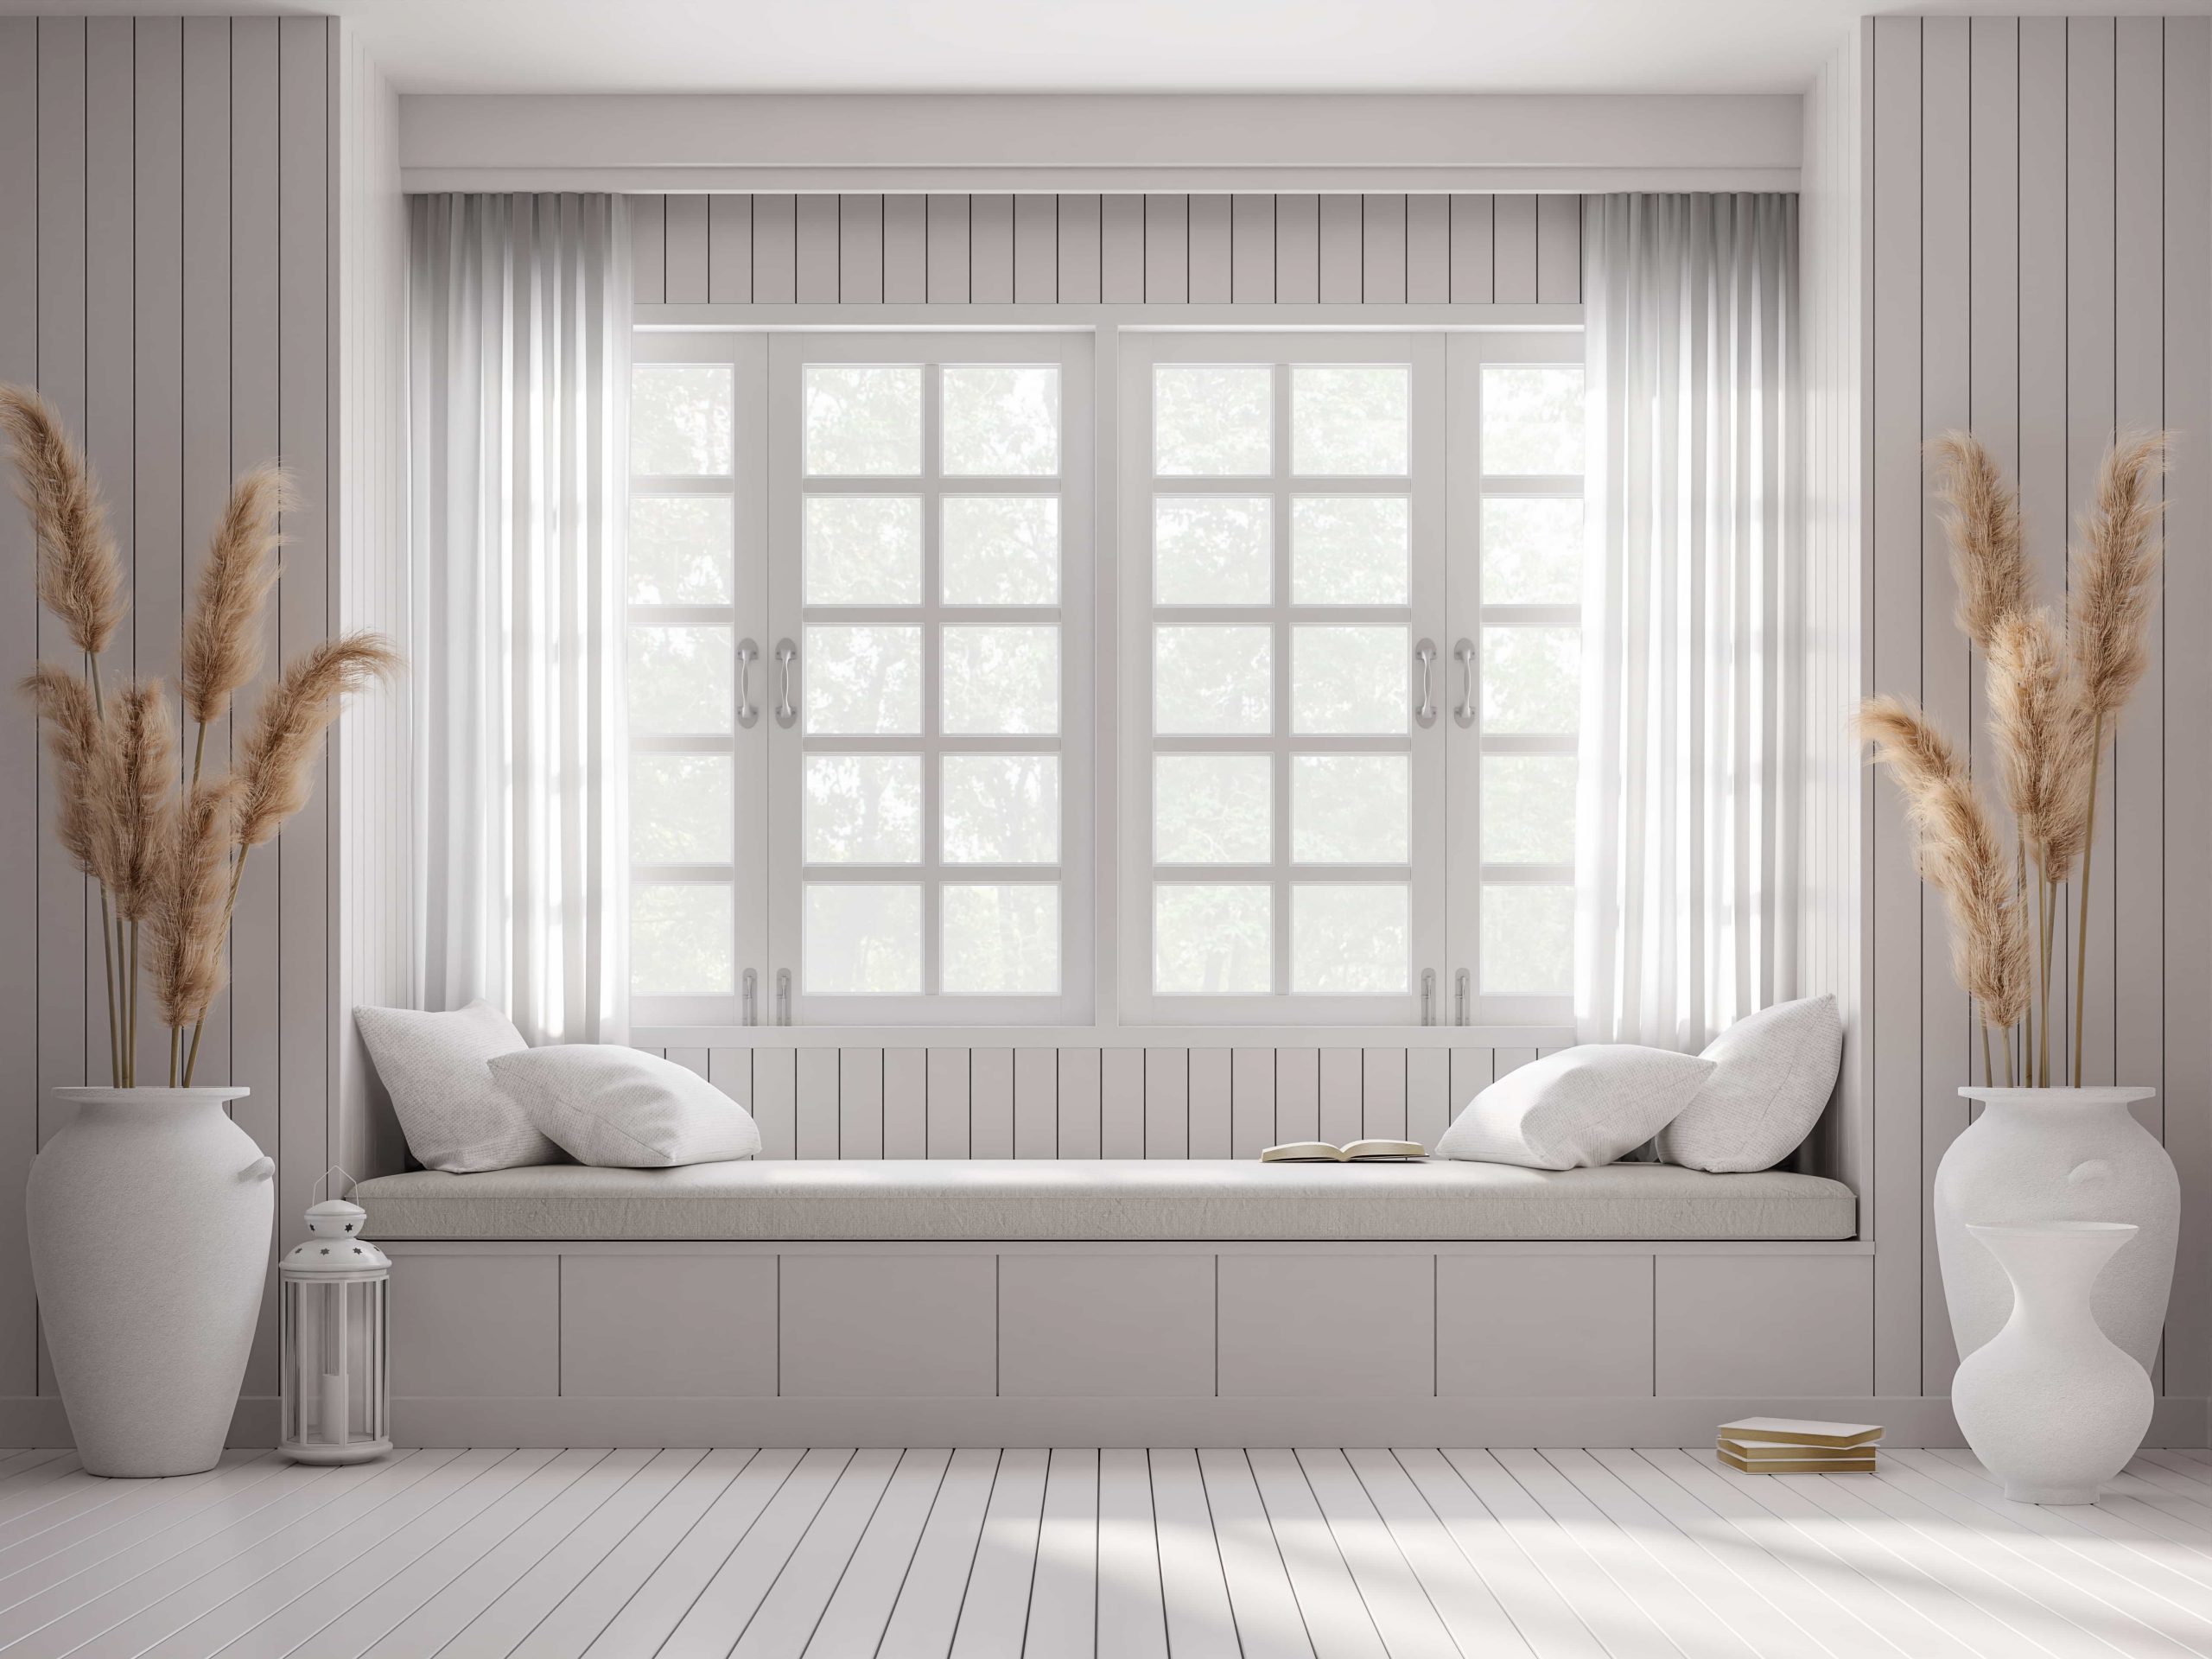  Save Download Preview Vintage style window seat 3d render.There are white wood plank wall and floor Decorated with big white jar with dry reed flower. Large windows looking out to see nature with curtains.